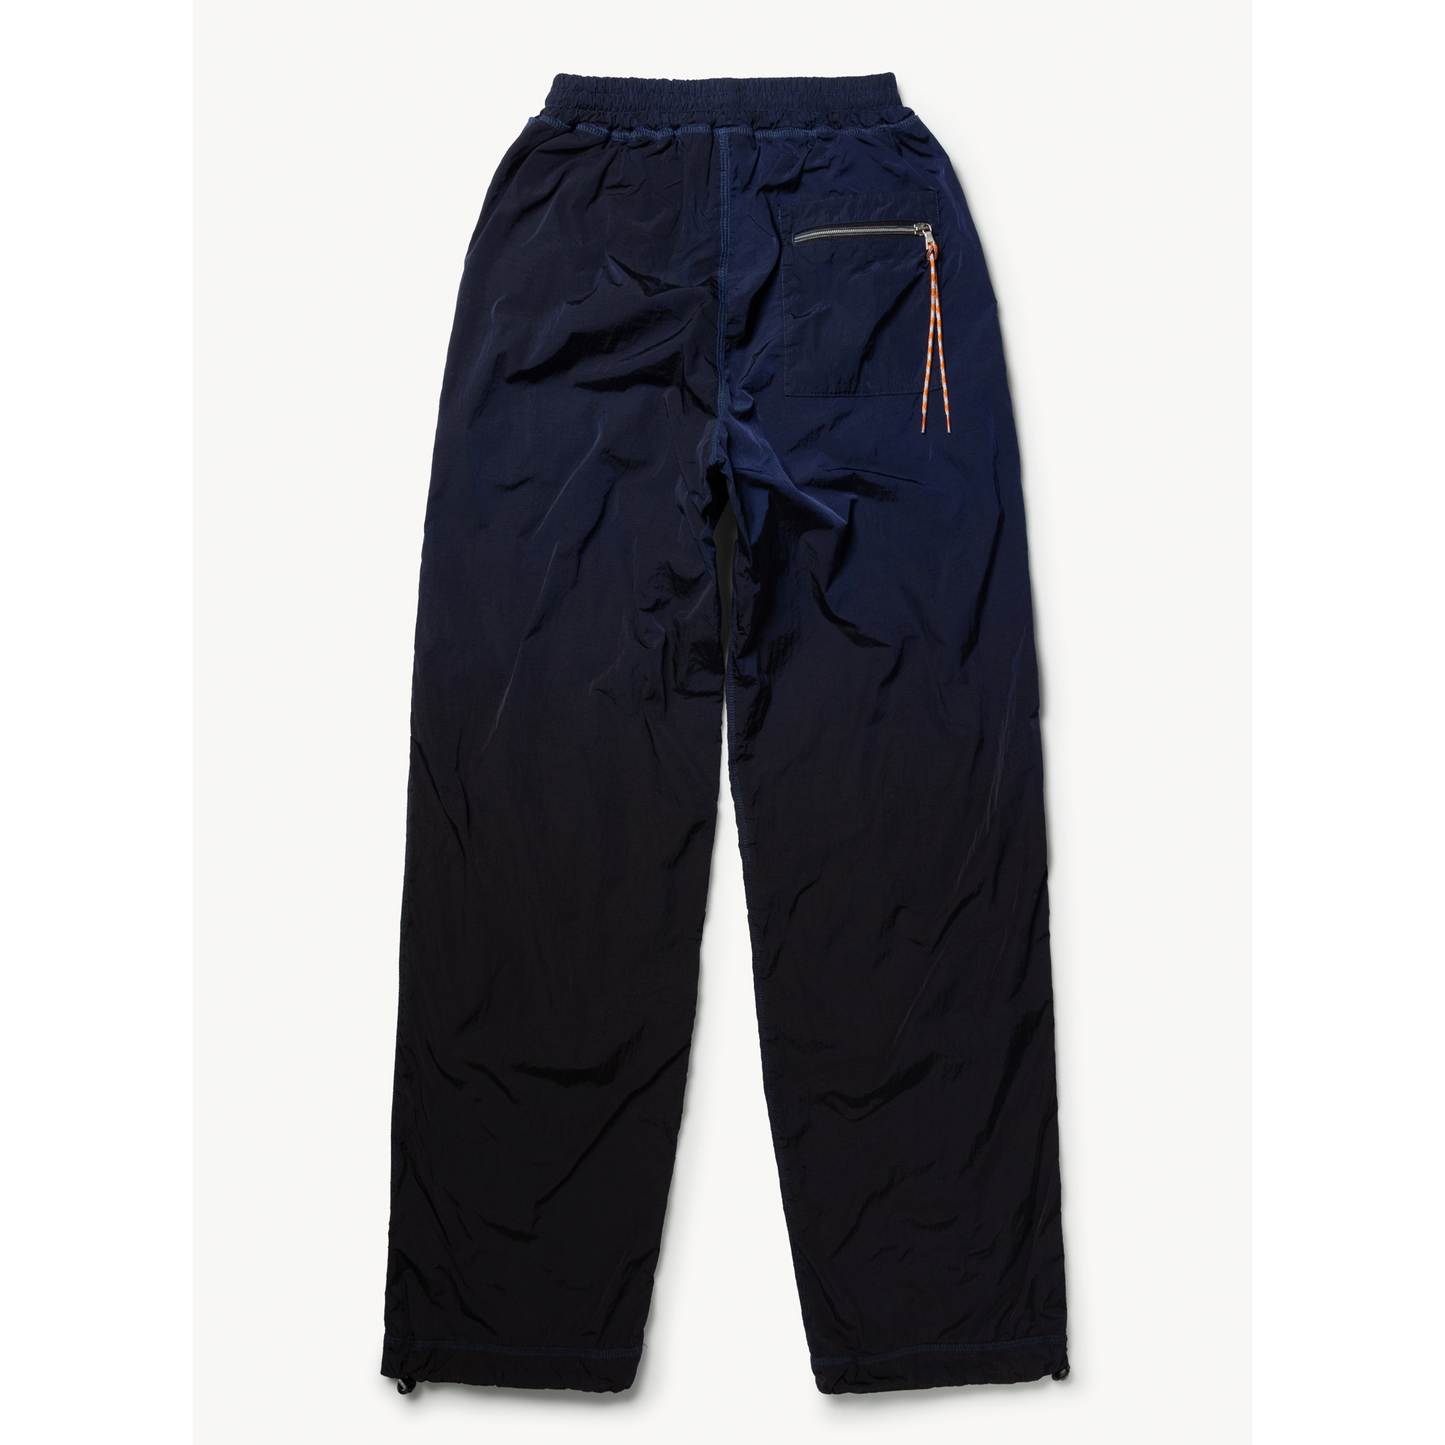 Aries Arise Spray-Dyed Windcheater Pant